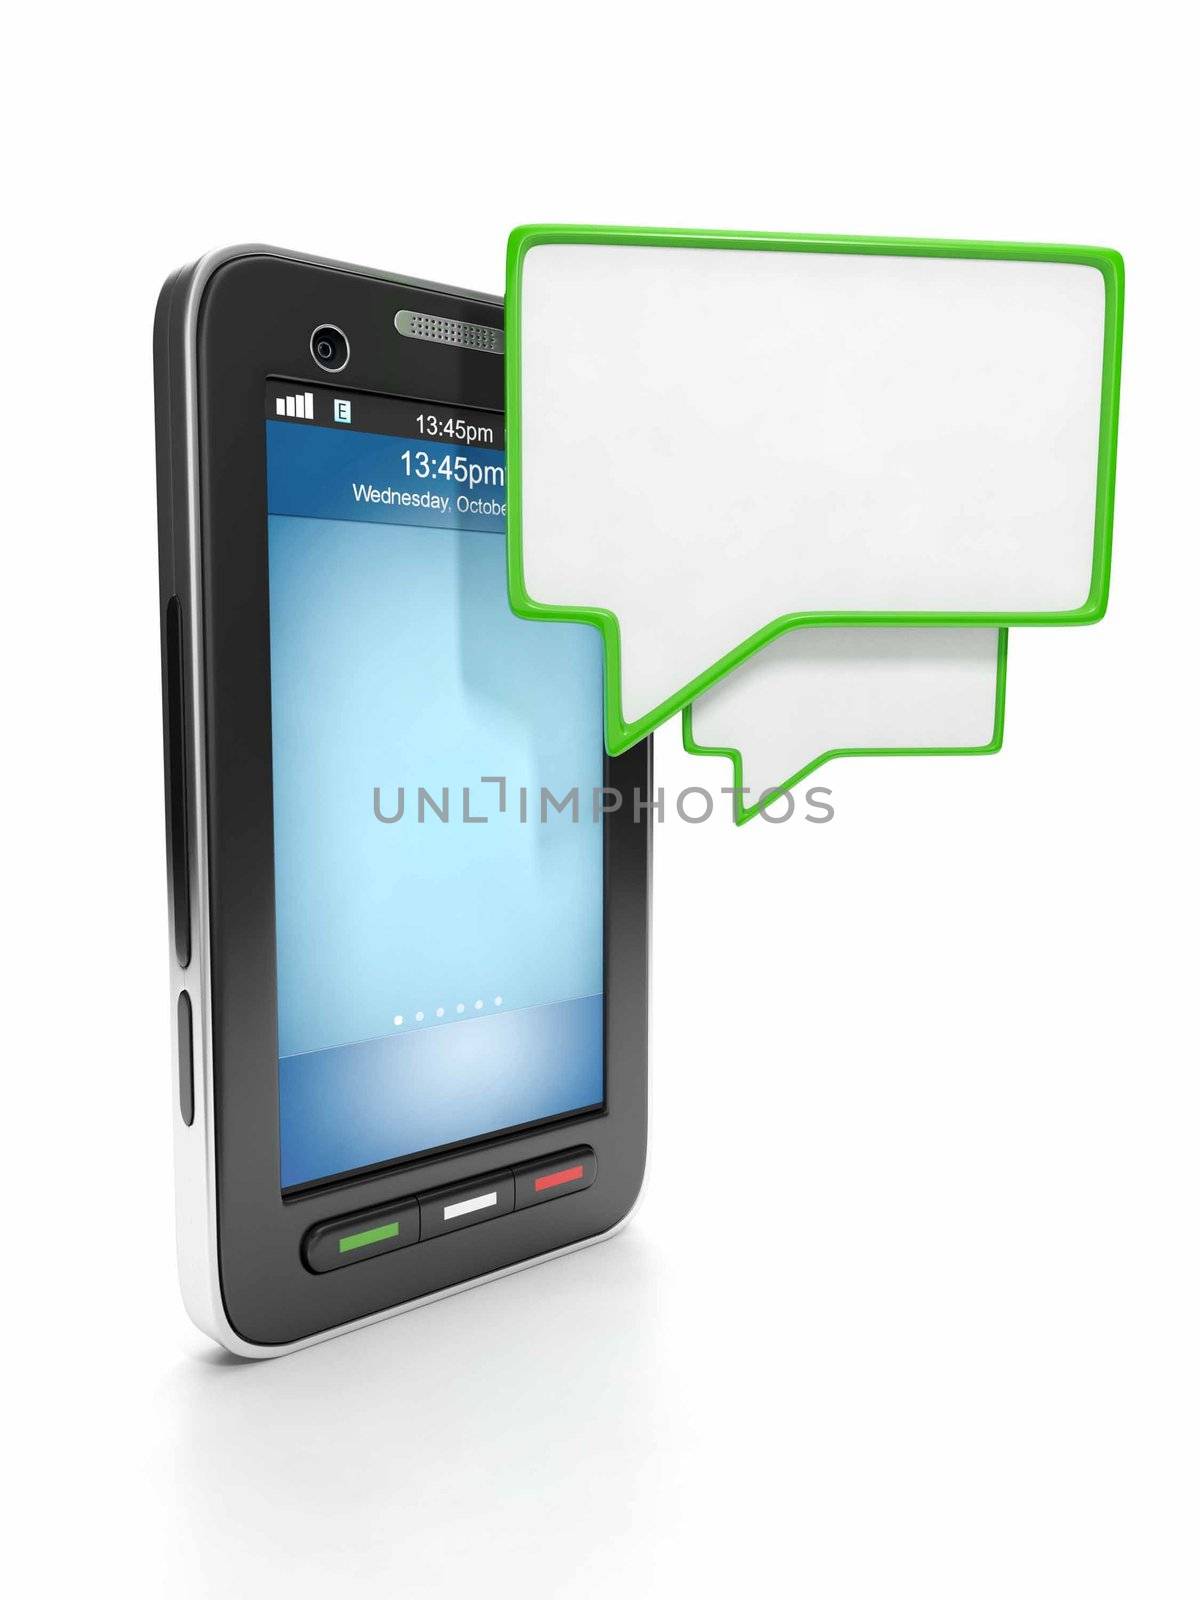 Mobile technology. Communication through instant messaging on a mobile phone